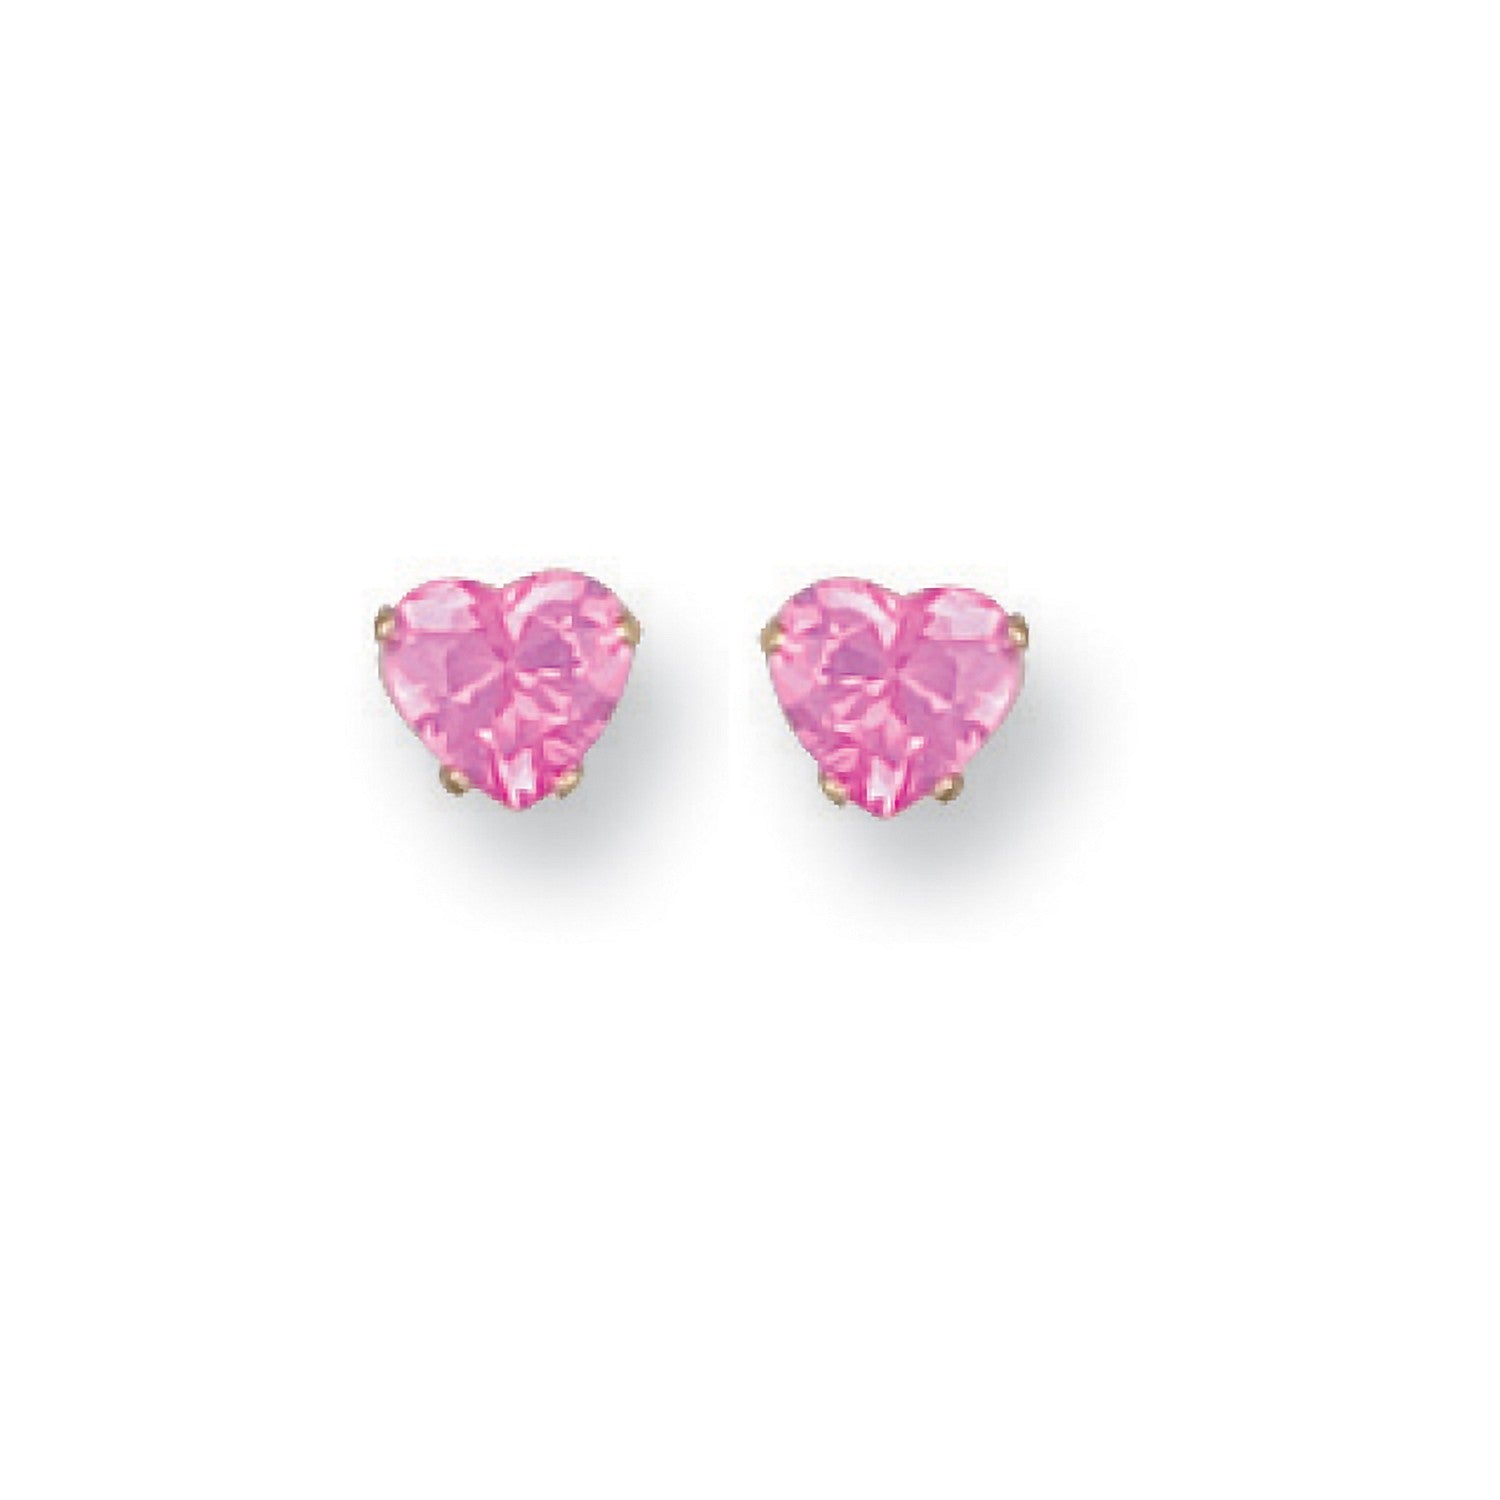 Yellow Gold Claw Set Pink Cz Studs